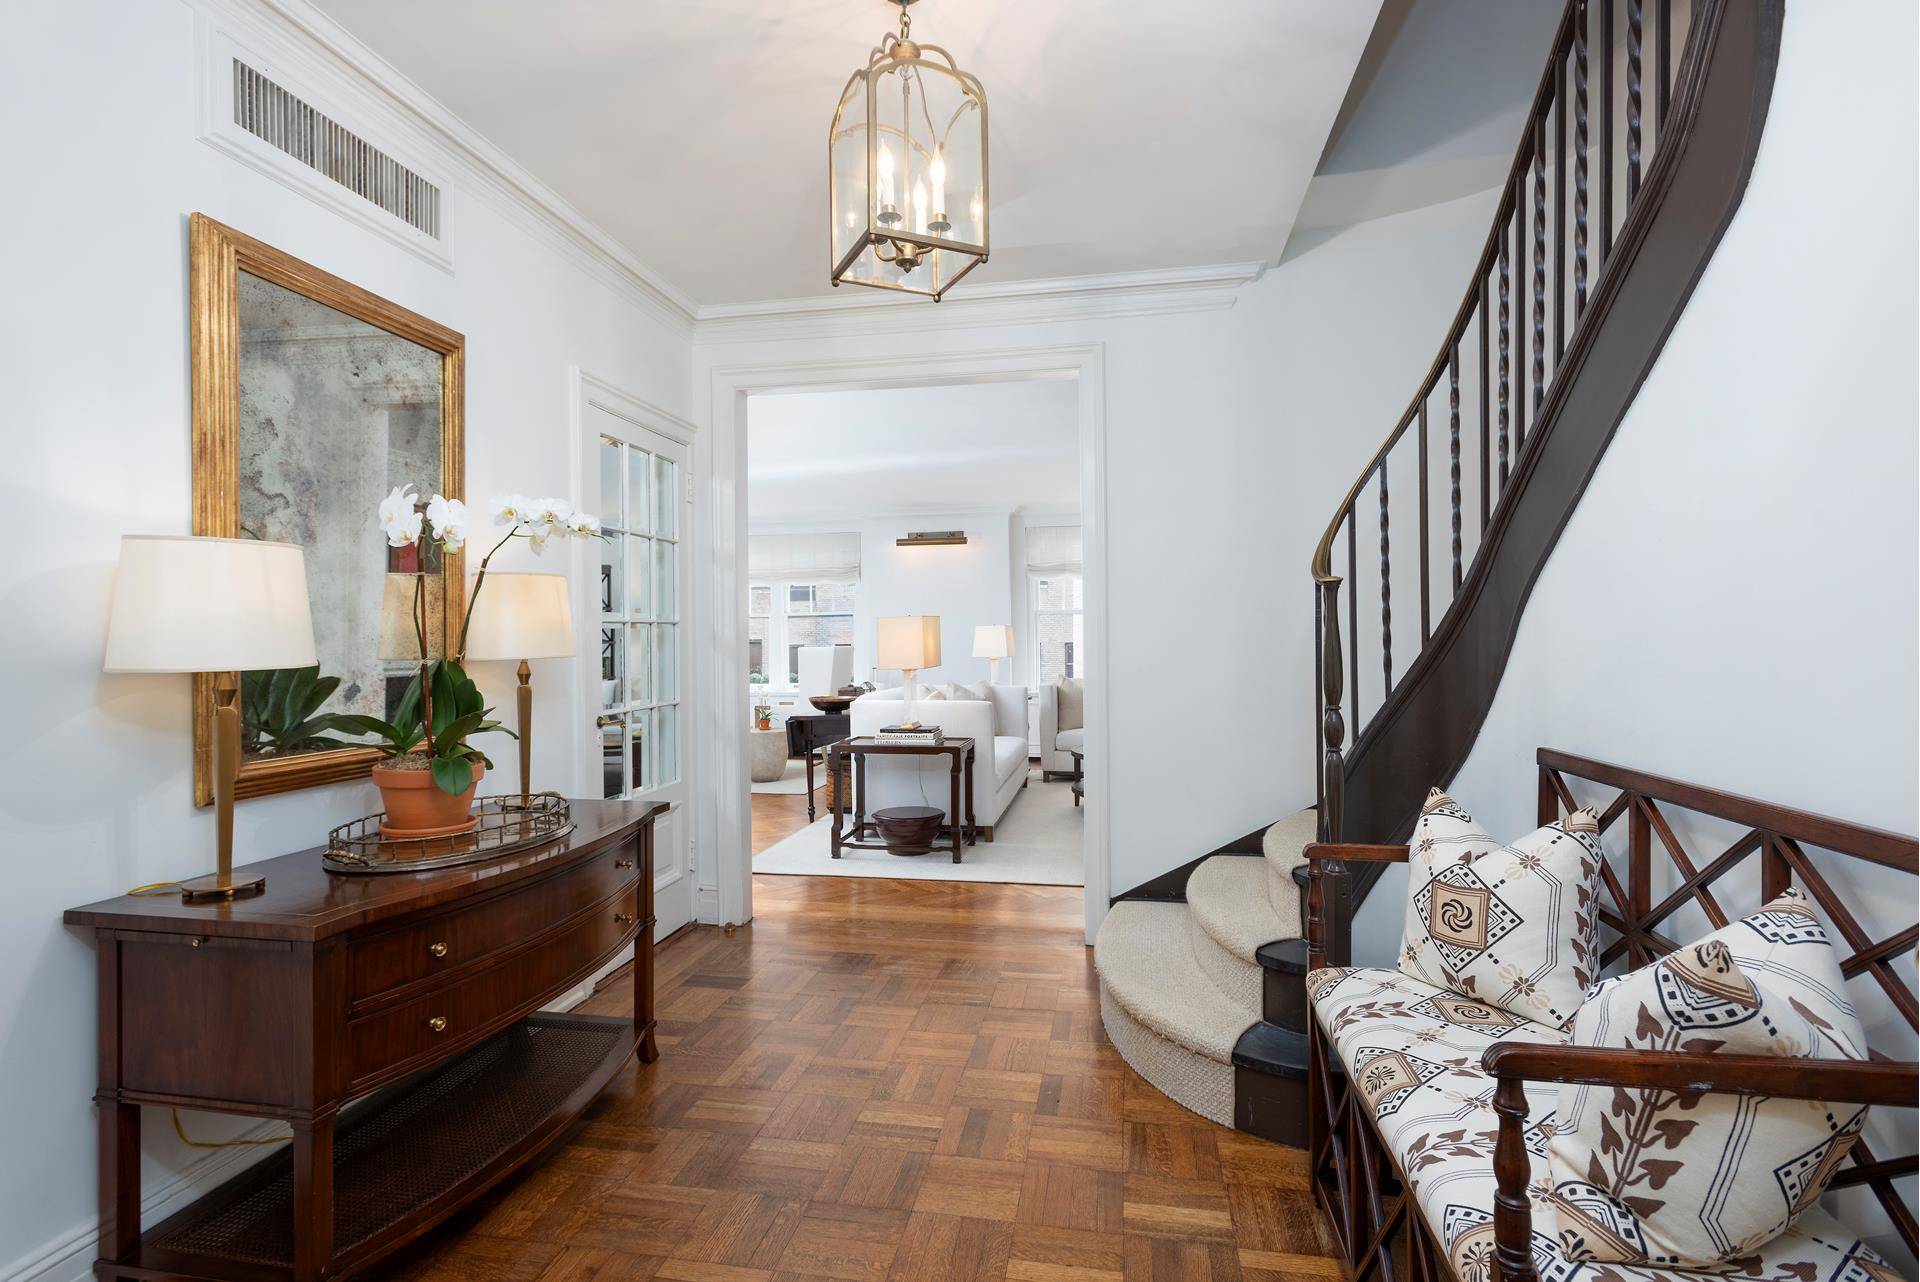 We are pleased to offer this wonderful Pre war Condominium Duplex in the heart of the Upper East Side !